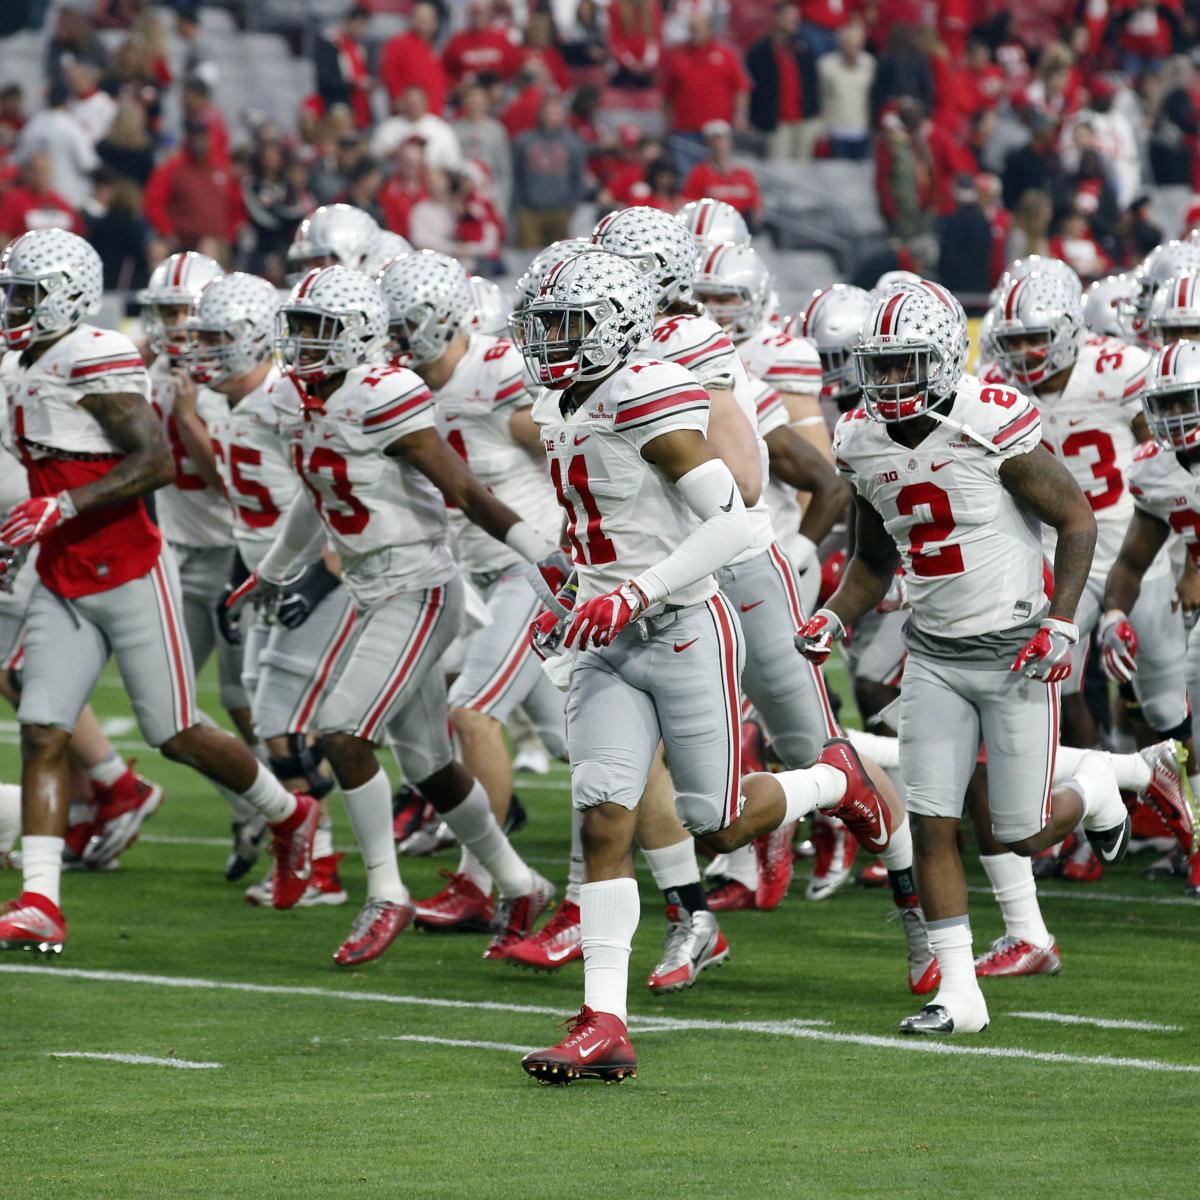 Ohio State Spring Game 2016 Recap, Highlights and Twitter Reaction